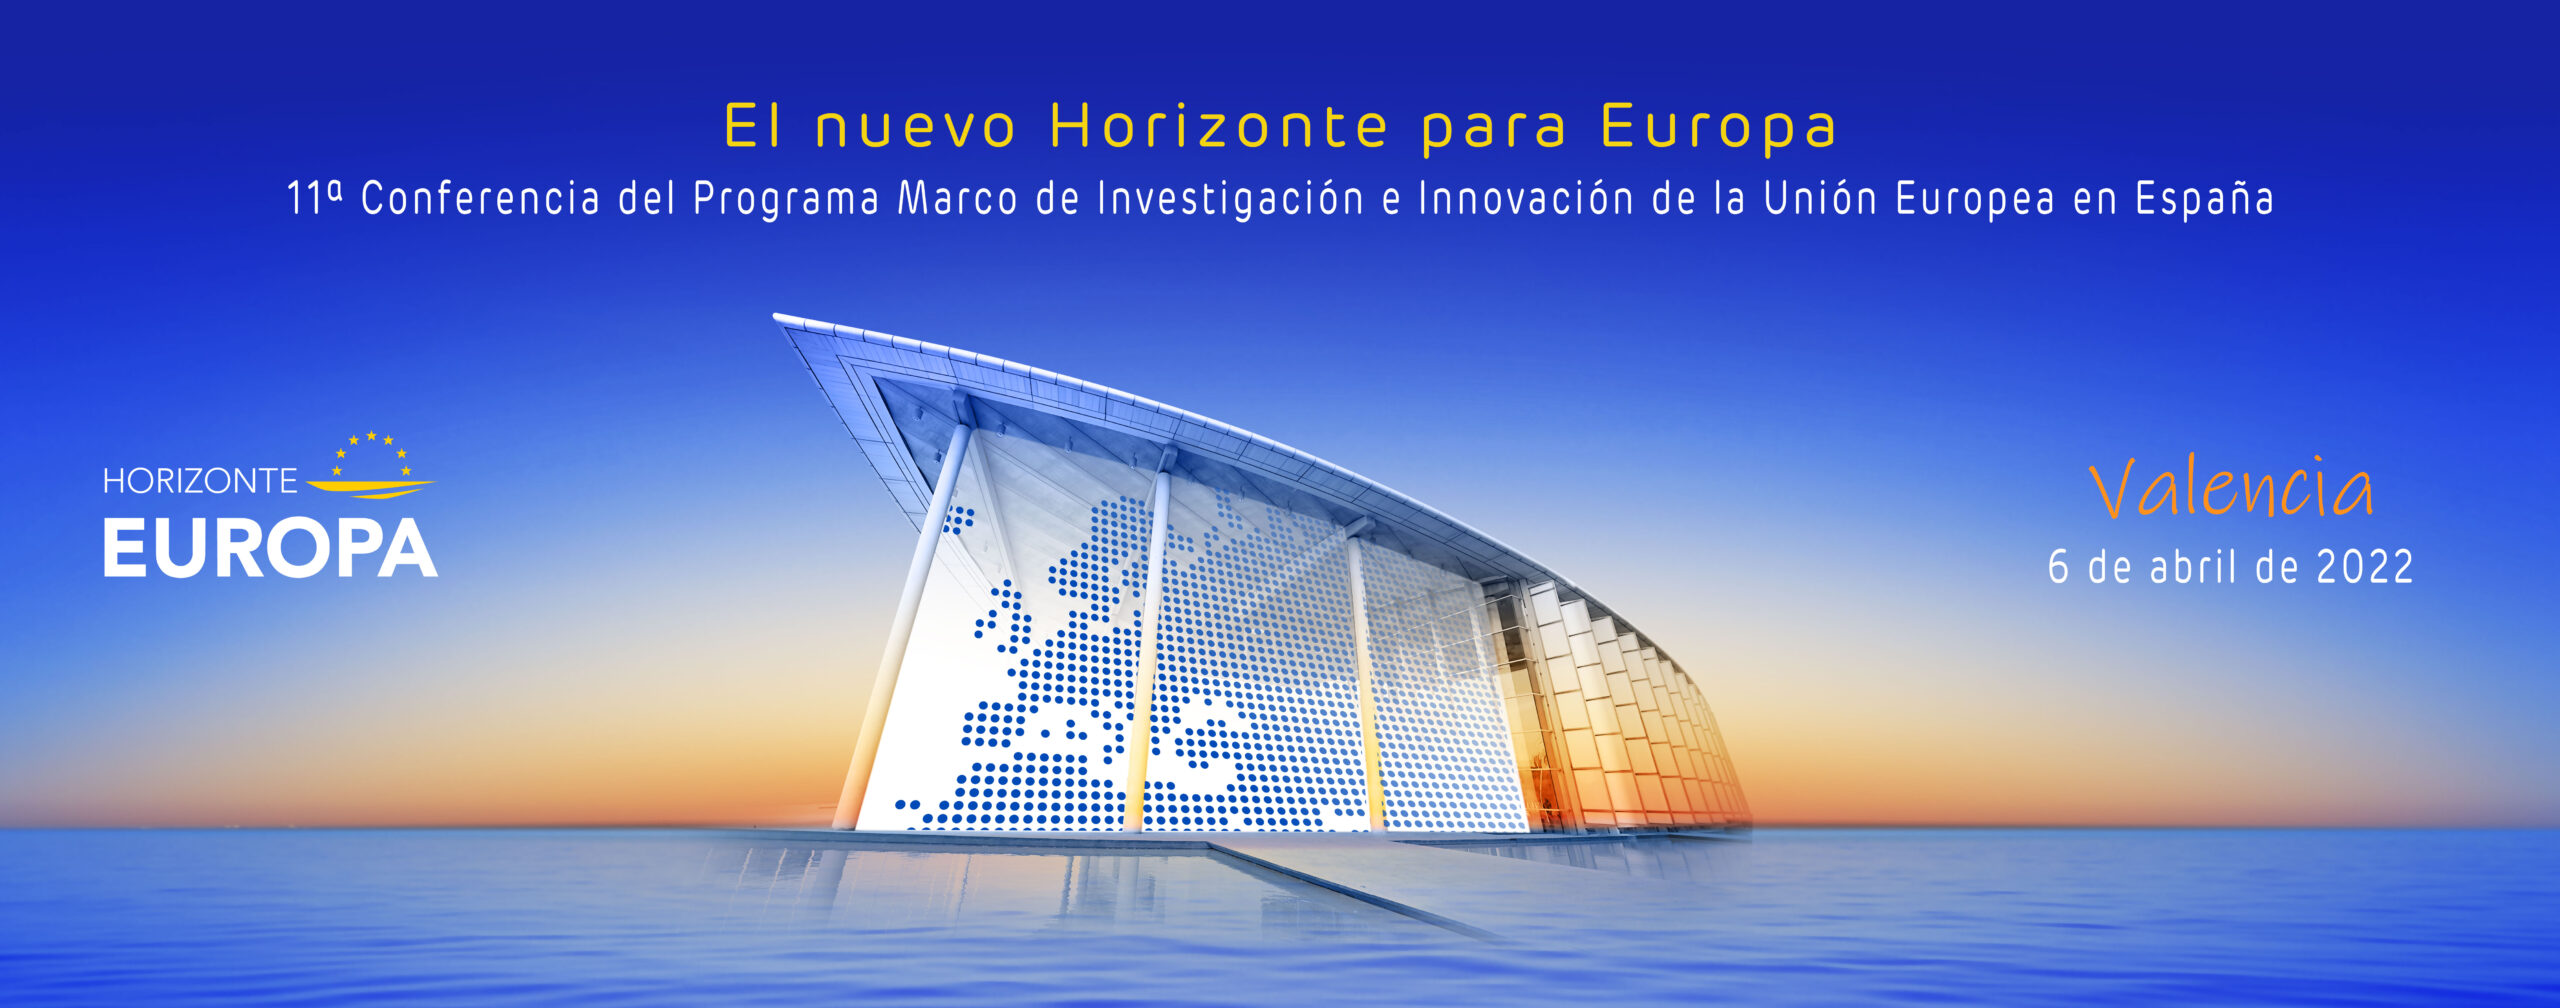 11th European Union Research & Innovation Framework Programme Conference